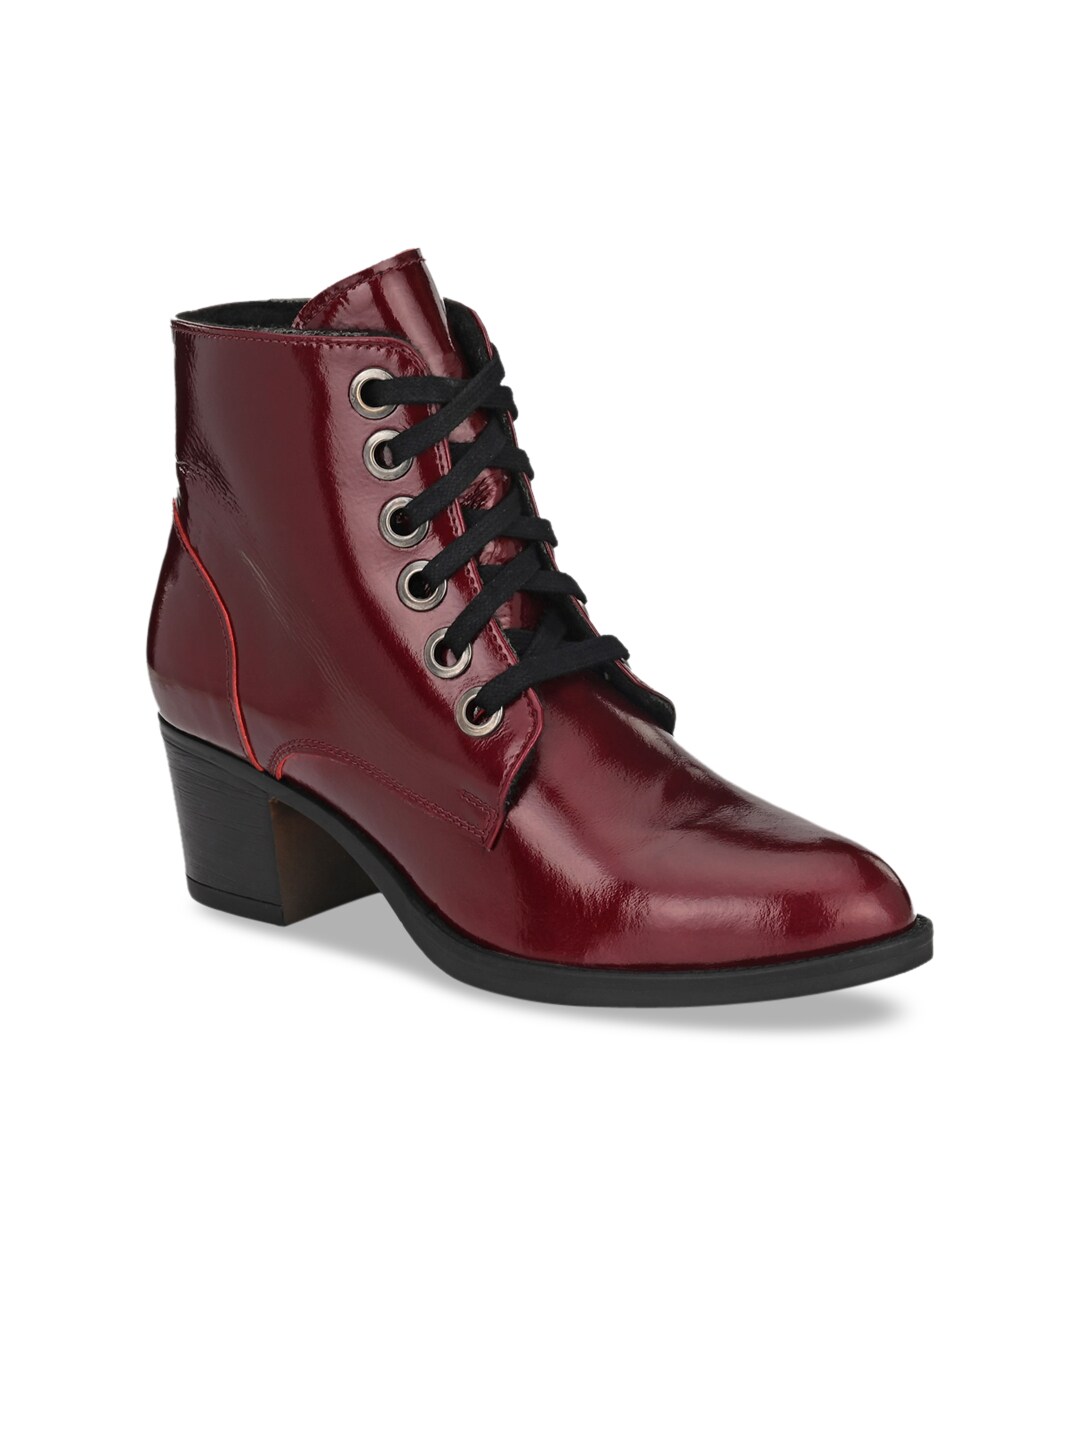 Delize Women Burgundy Solid Leather High-Top Block Heeled Boots Price in India